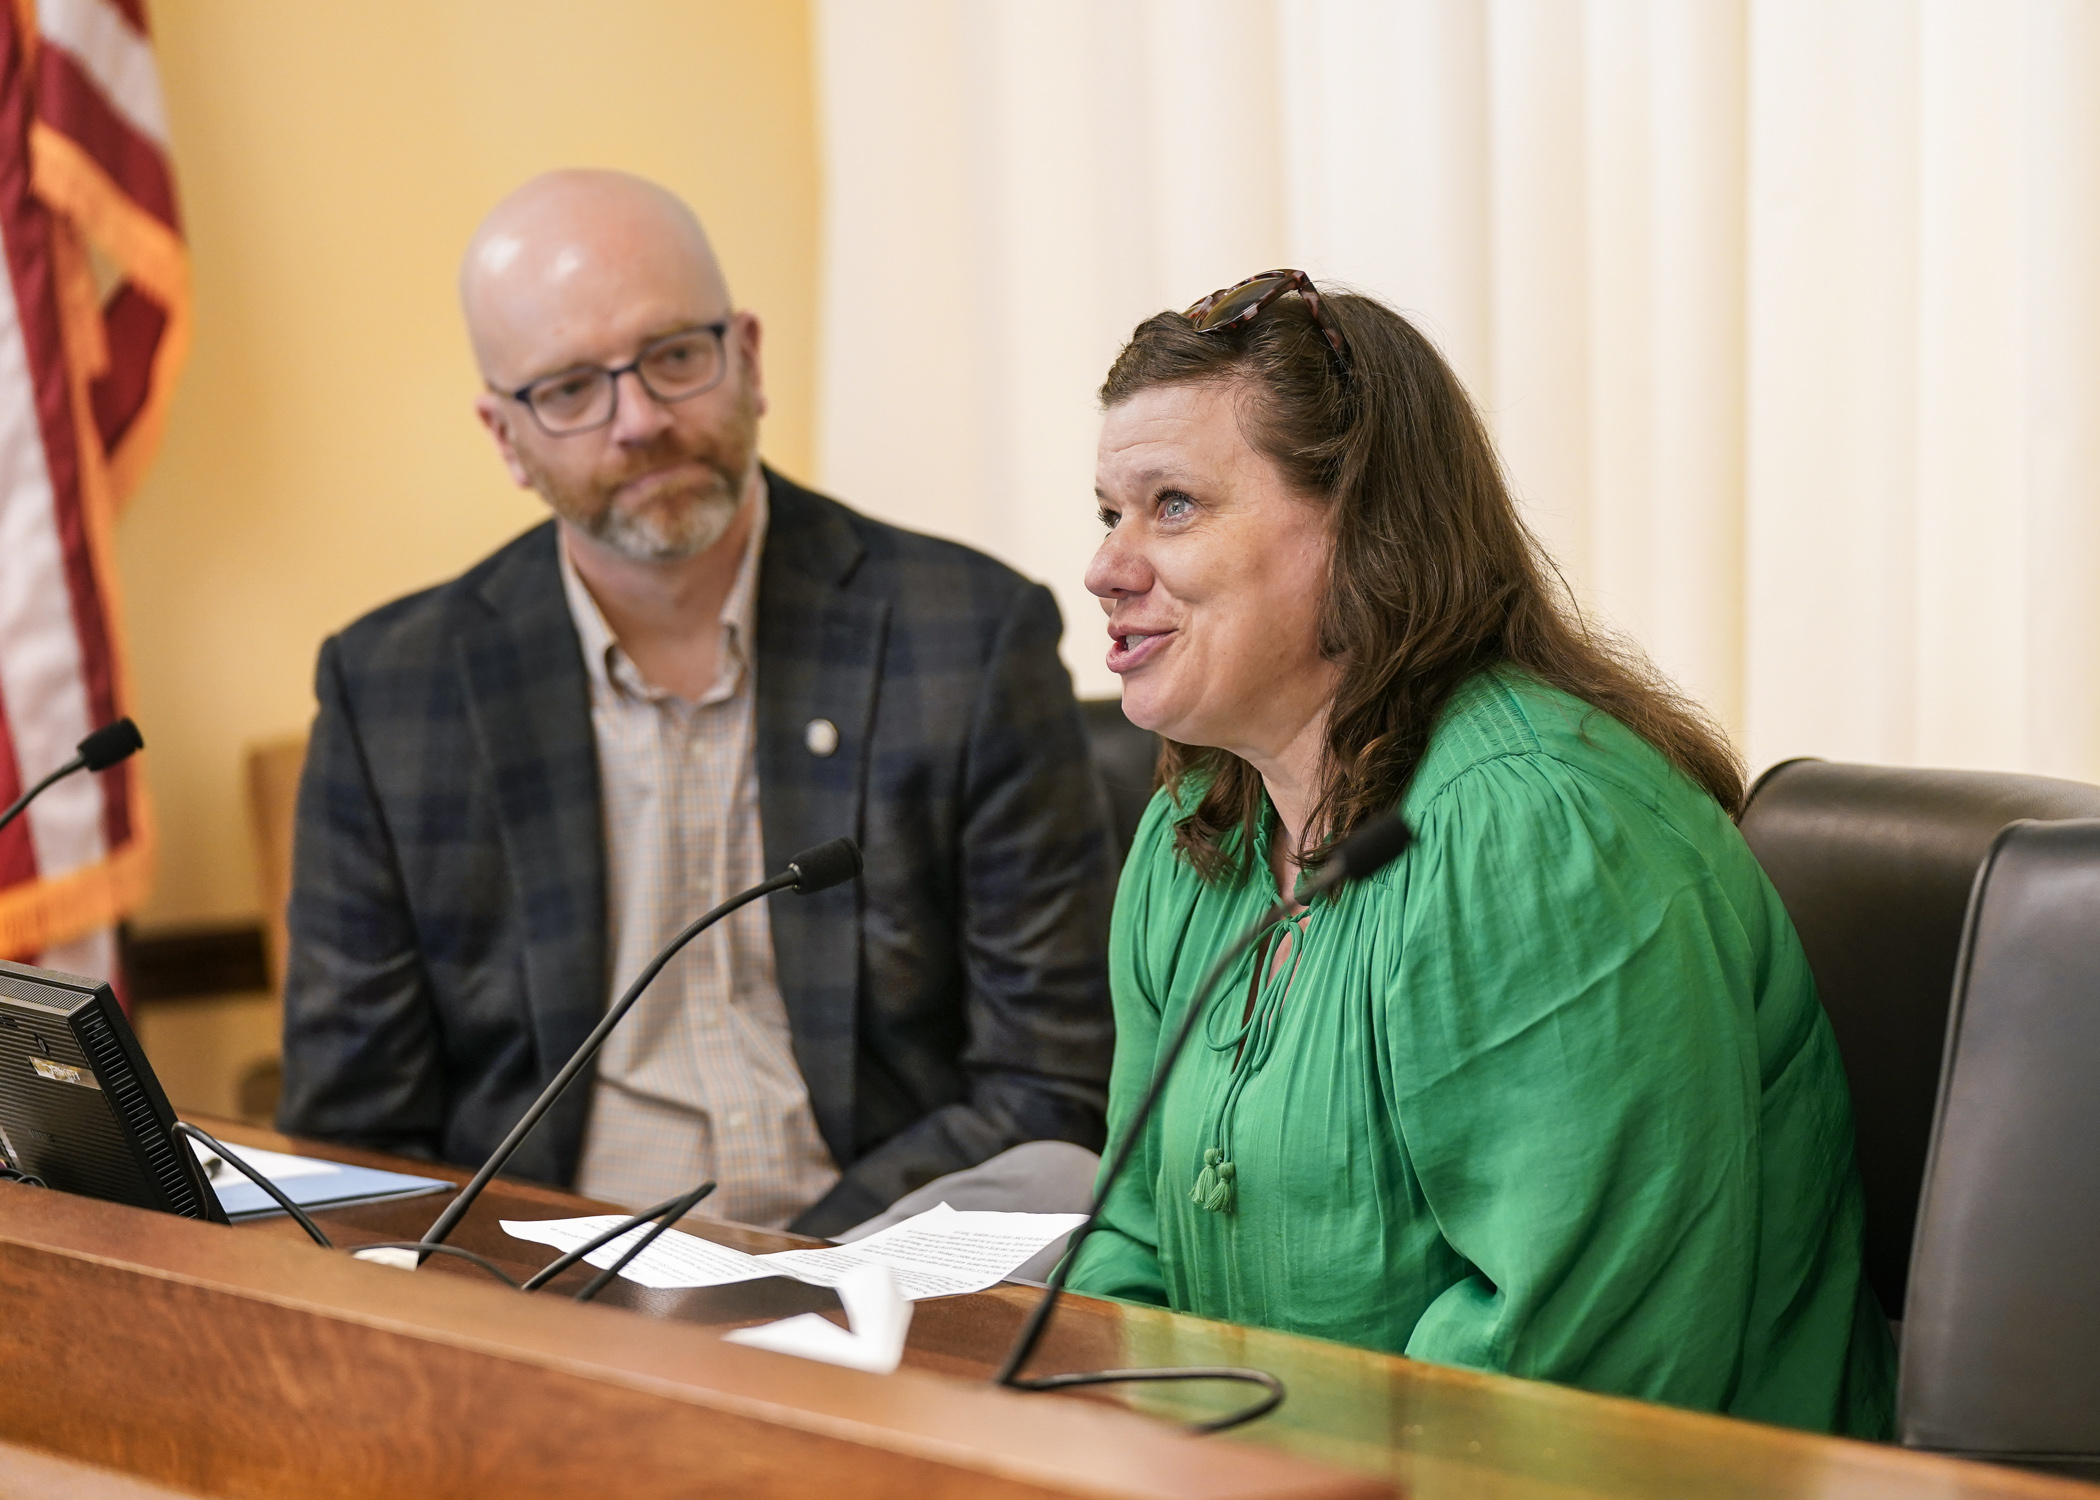 Sarah Rapp, a food service employee at Hastings High School, testifies before the House Education Finance Committee March 7 in support of a bill to would provide greater benefits to school personnel and paraprofessionals. (Photo by Catherine Davis)